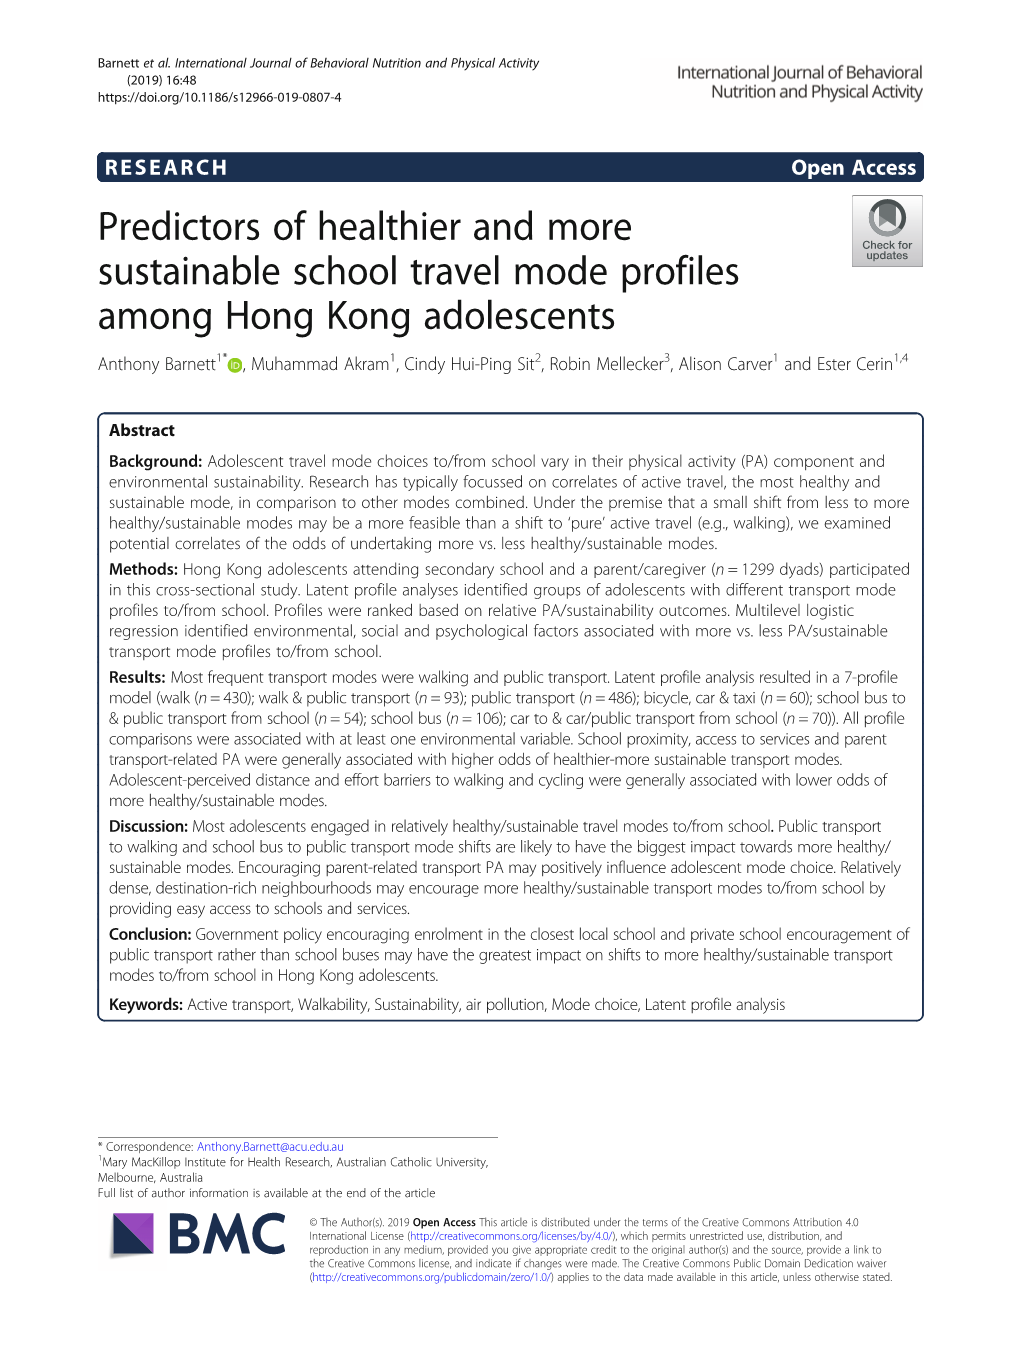 Predictors of Healthier and More Sustainable School Travel Mode Profiles Among Hong Kong Adolescents